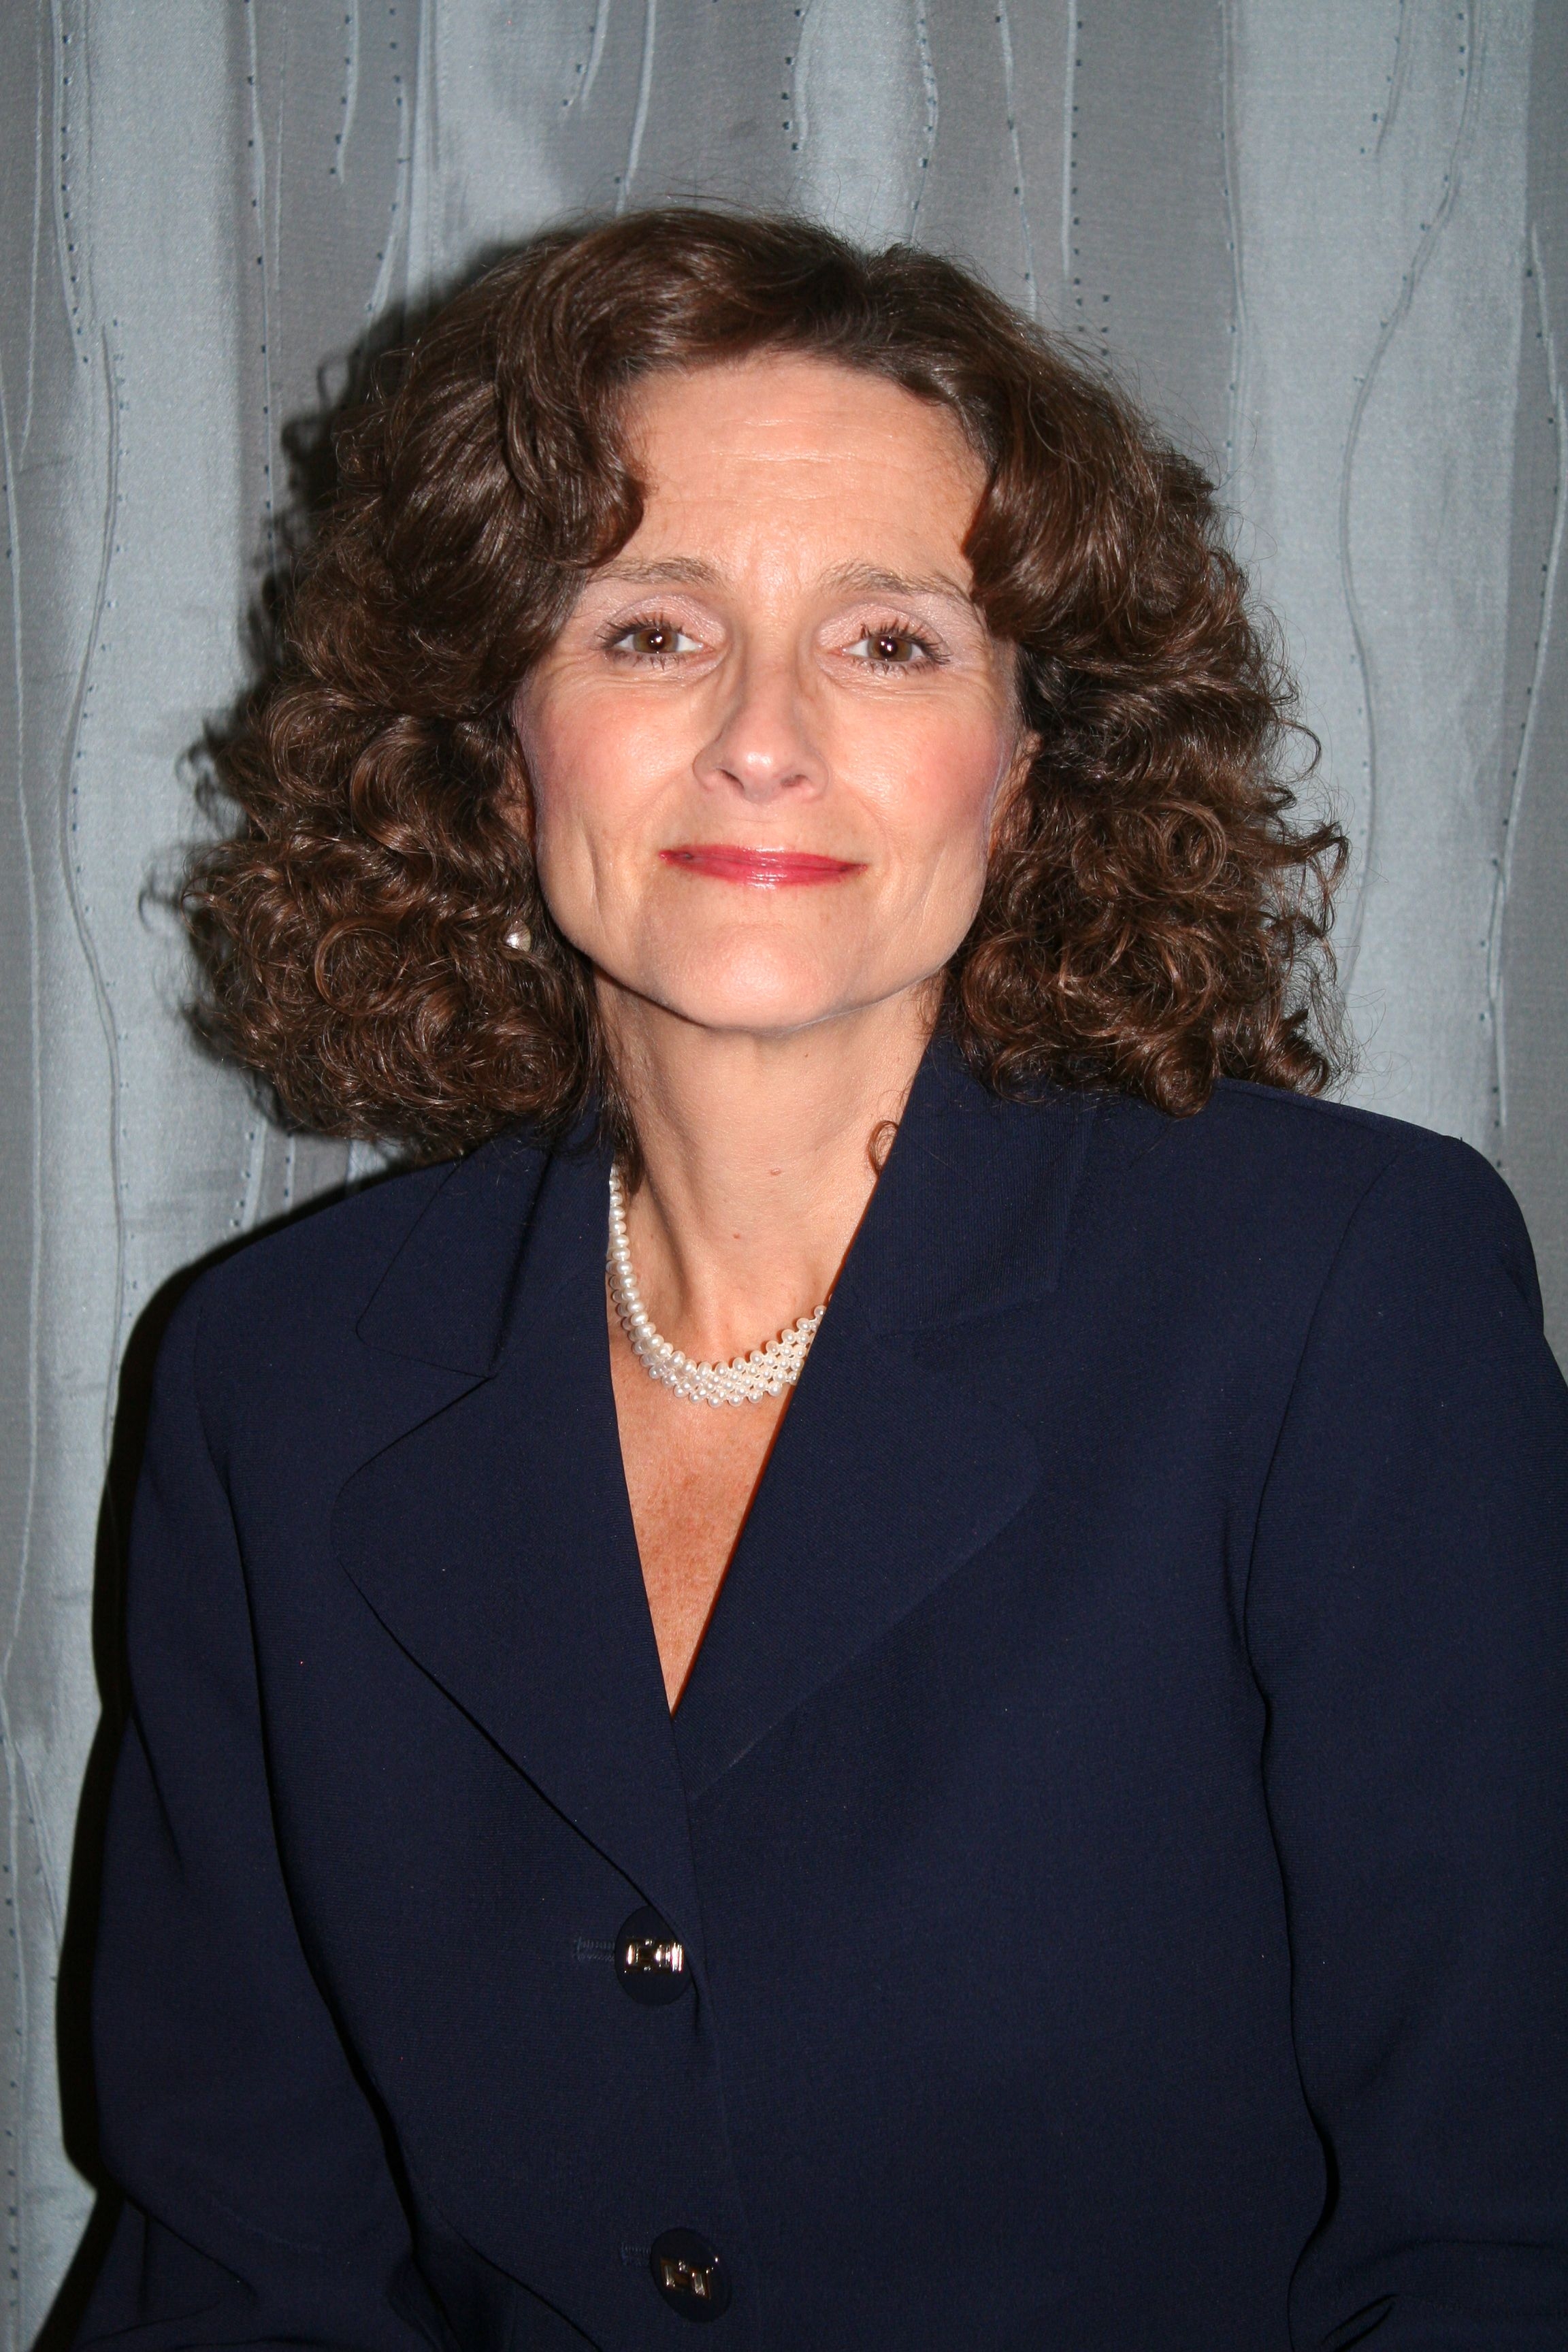 Lynne Carrithers, J.D.